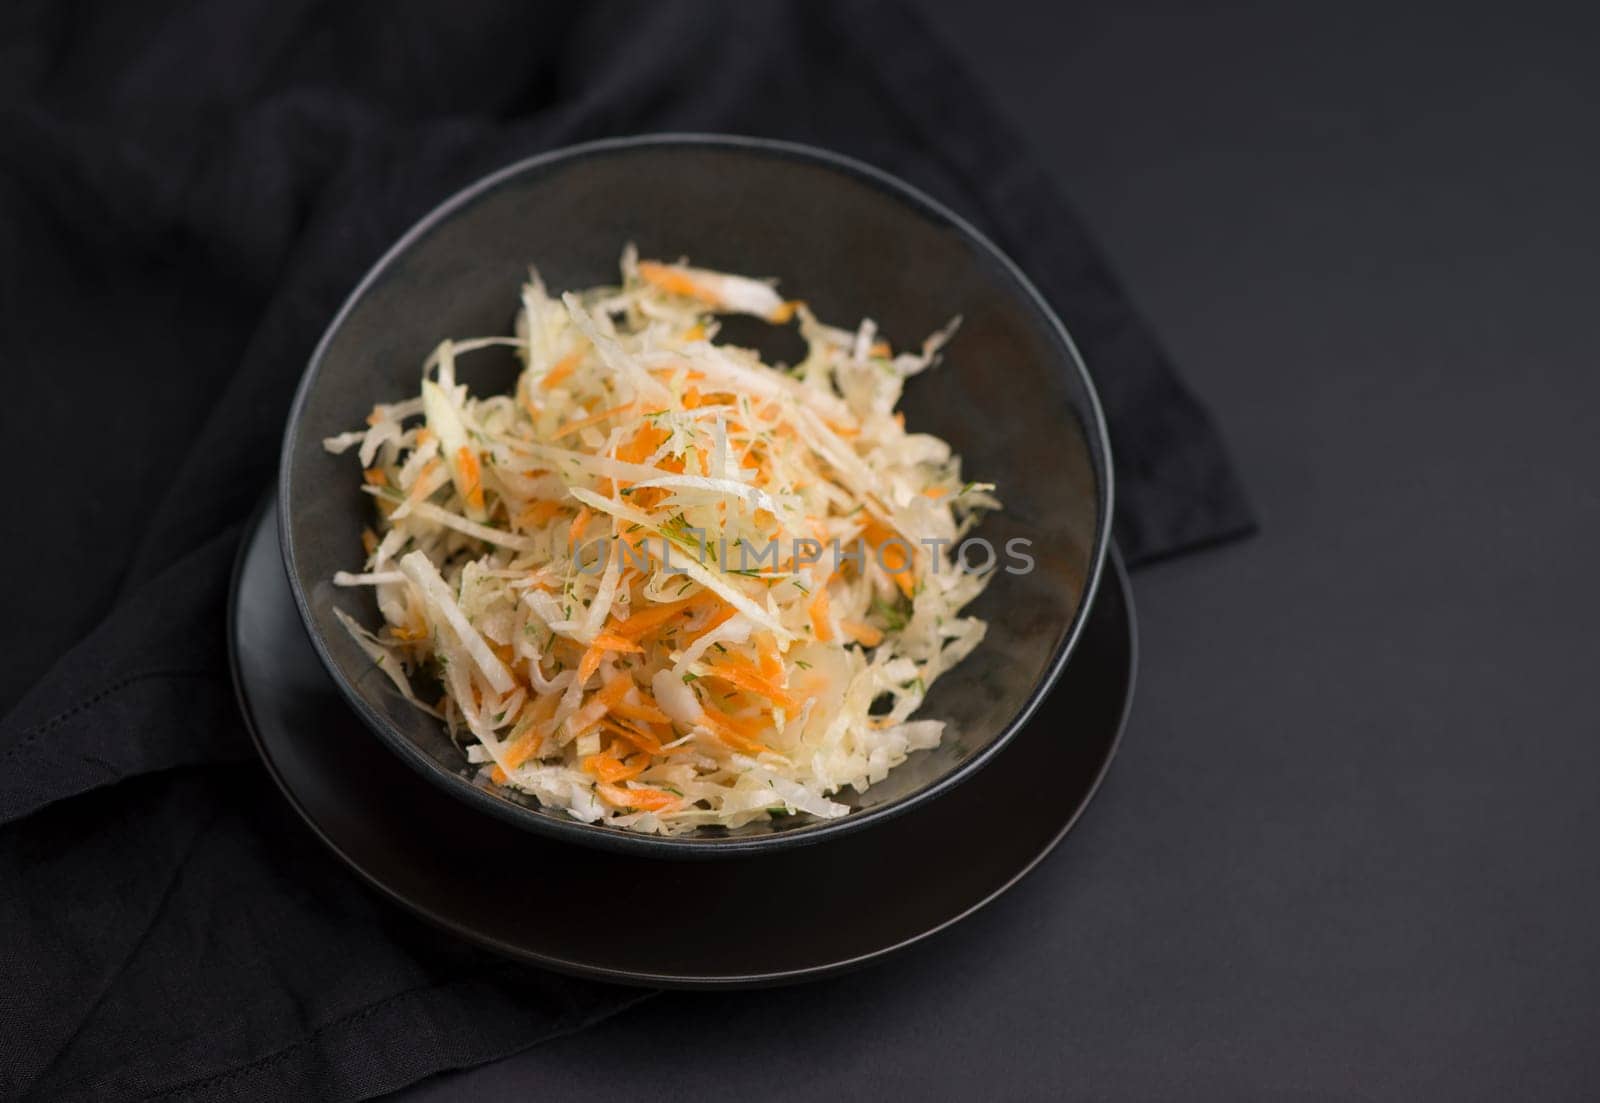 Cabbage salad. Homemade salad of cabbage, carrots and apples in a wooden bowl on a dark background top view. Vegan or diet food. by aprilphoto